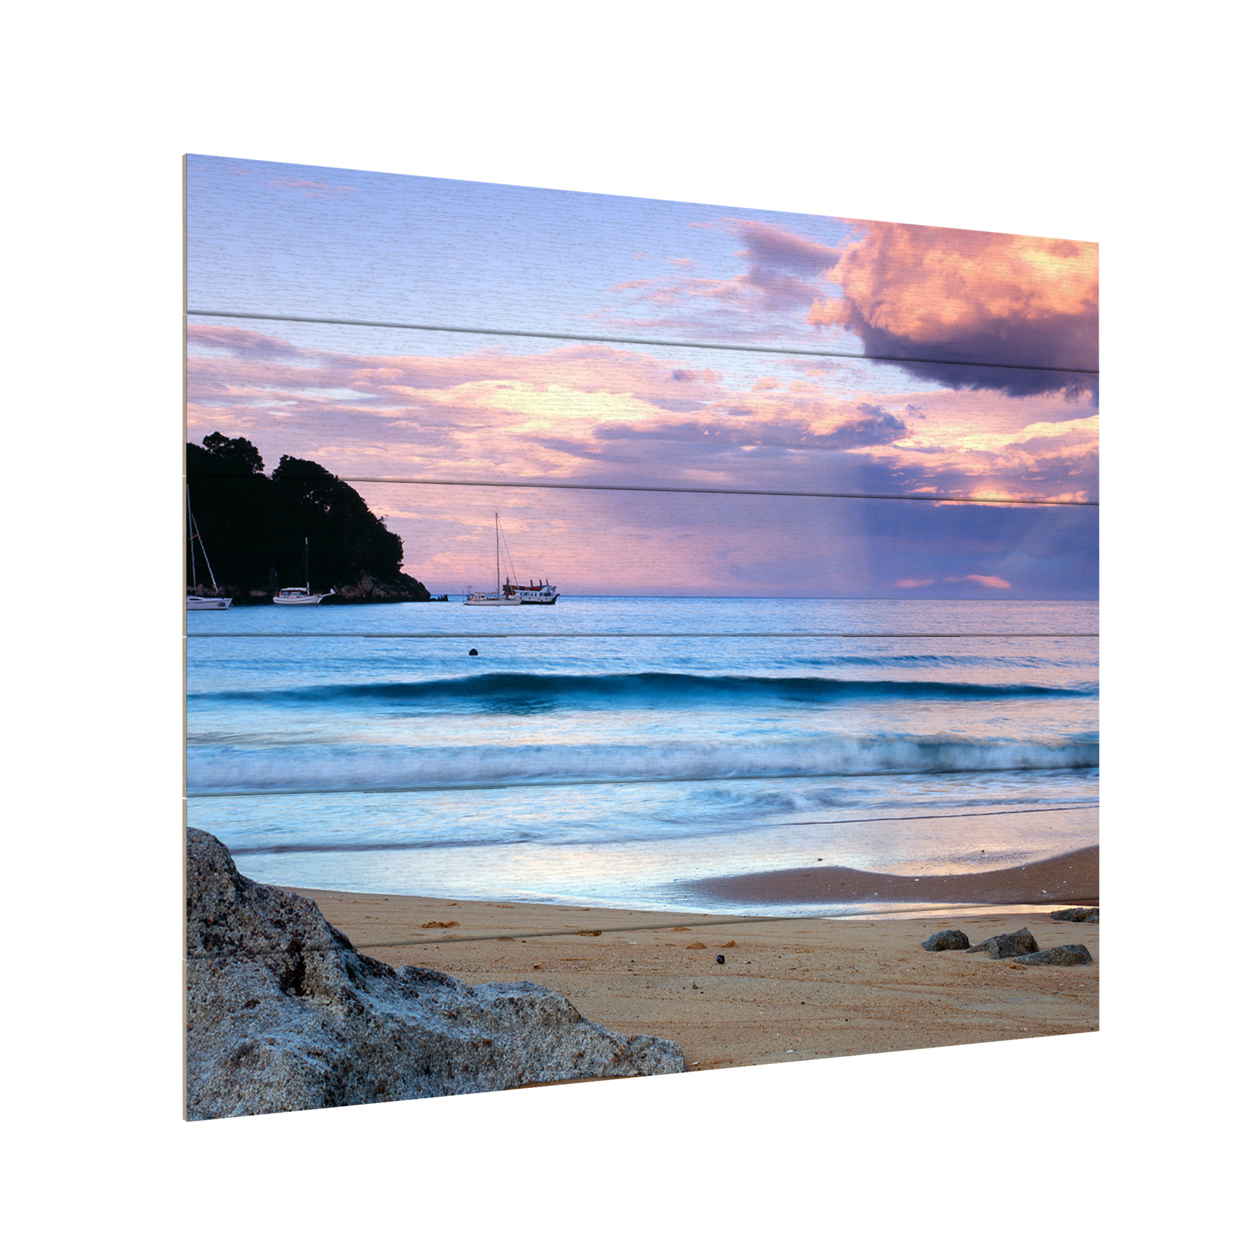 Wooden Slat Art 18 X 22 Inches Titled Kaiteriteri Sunset Ready To Hang Home Decor Picture